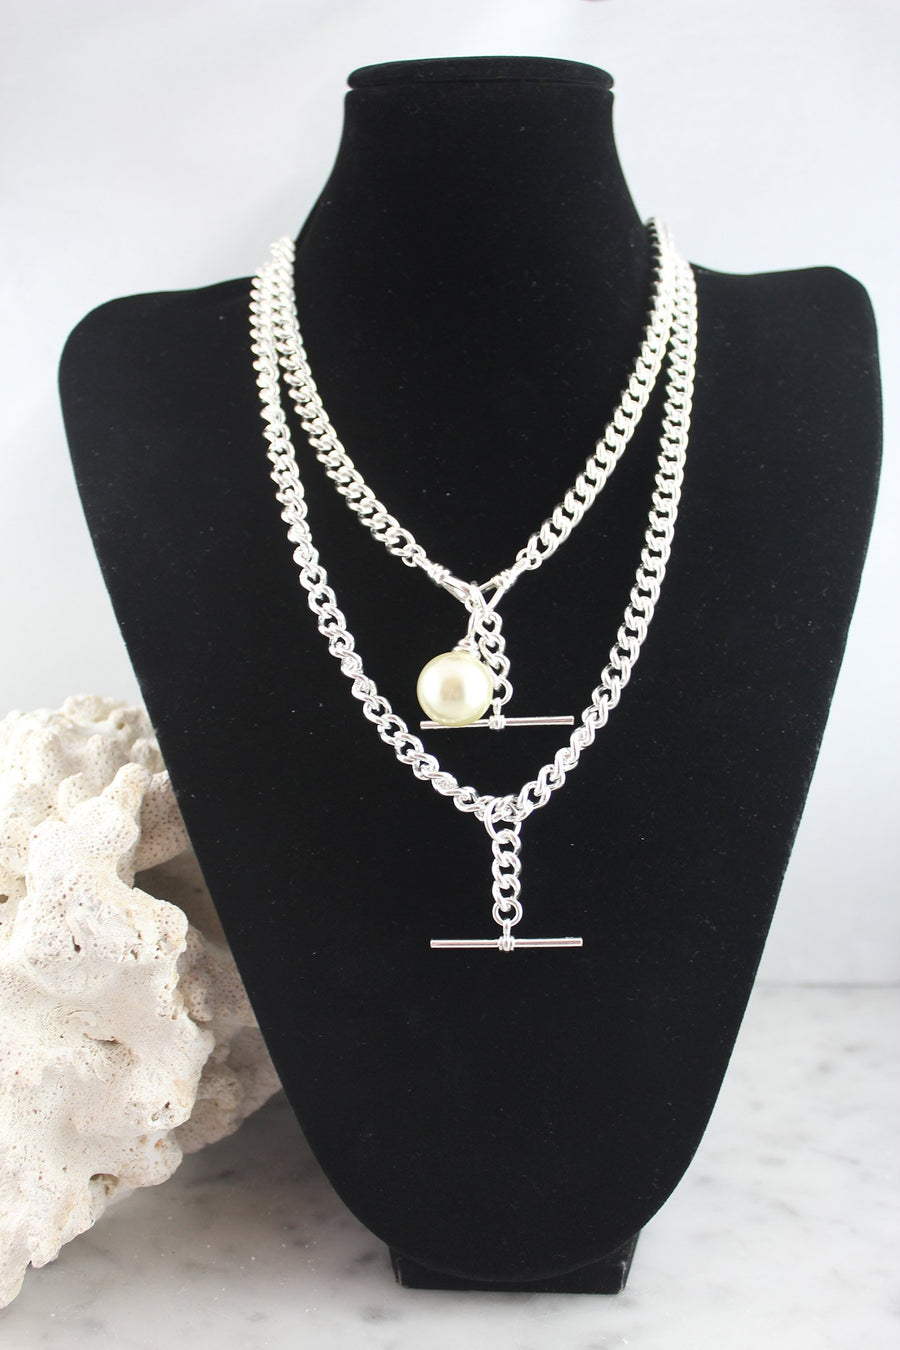 Sterling silver fob chains with pearl adornments